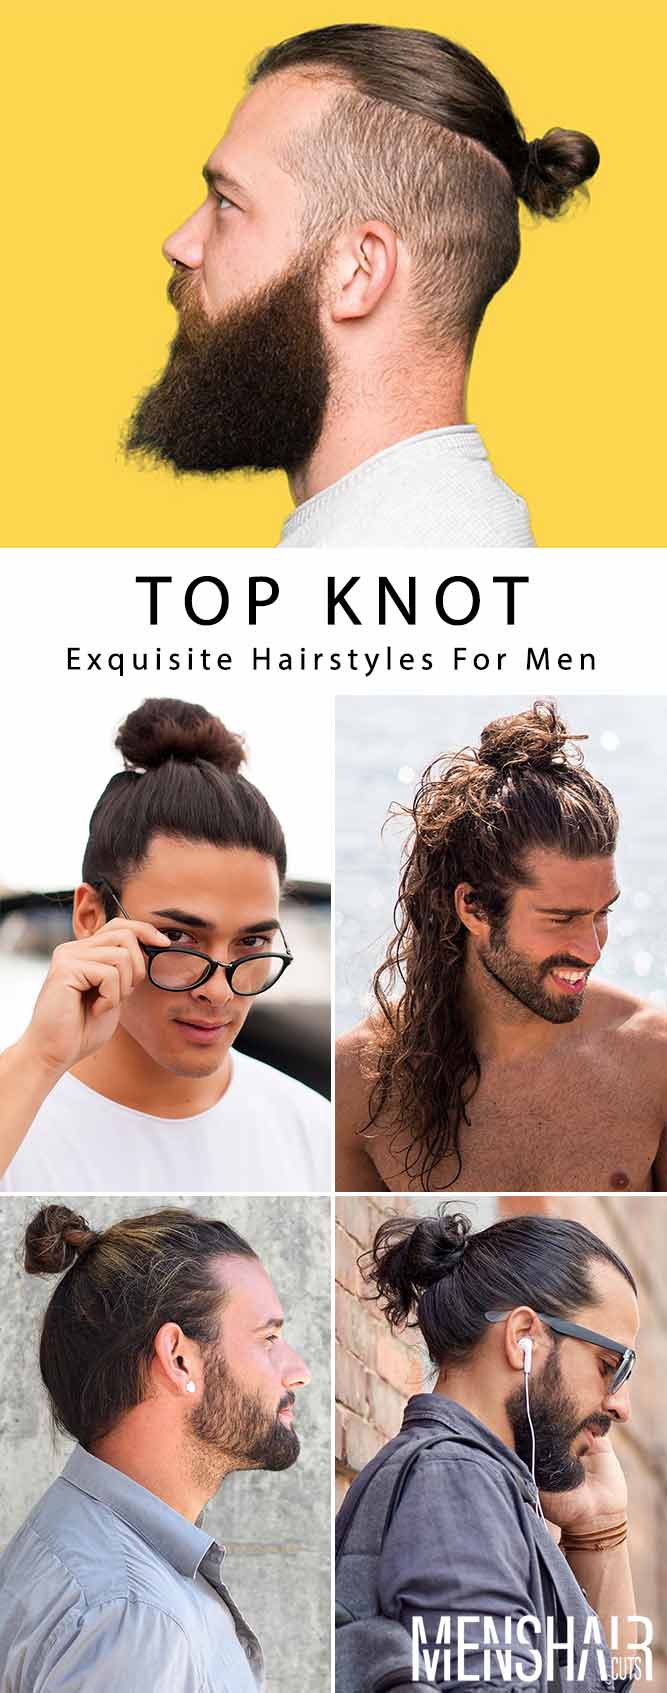 Will A Man Bun Or Top Knot Suit Your Face Shape?